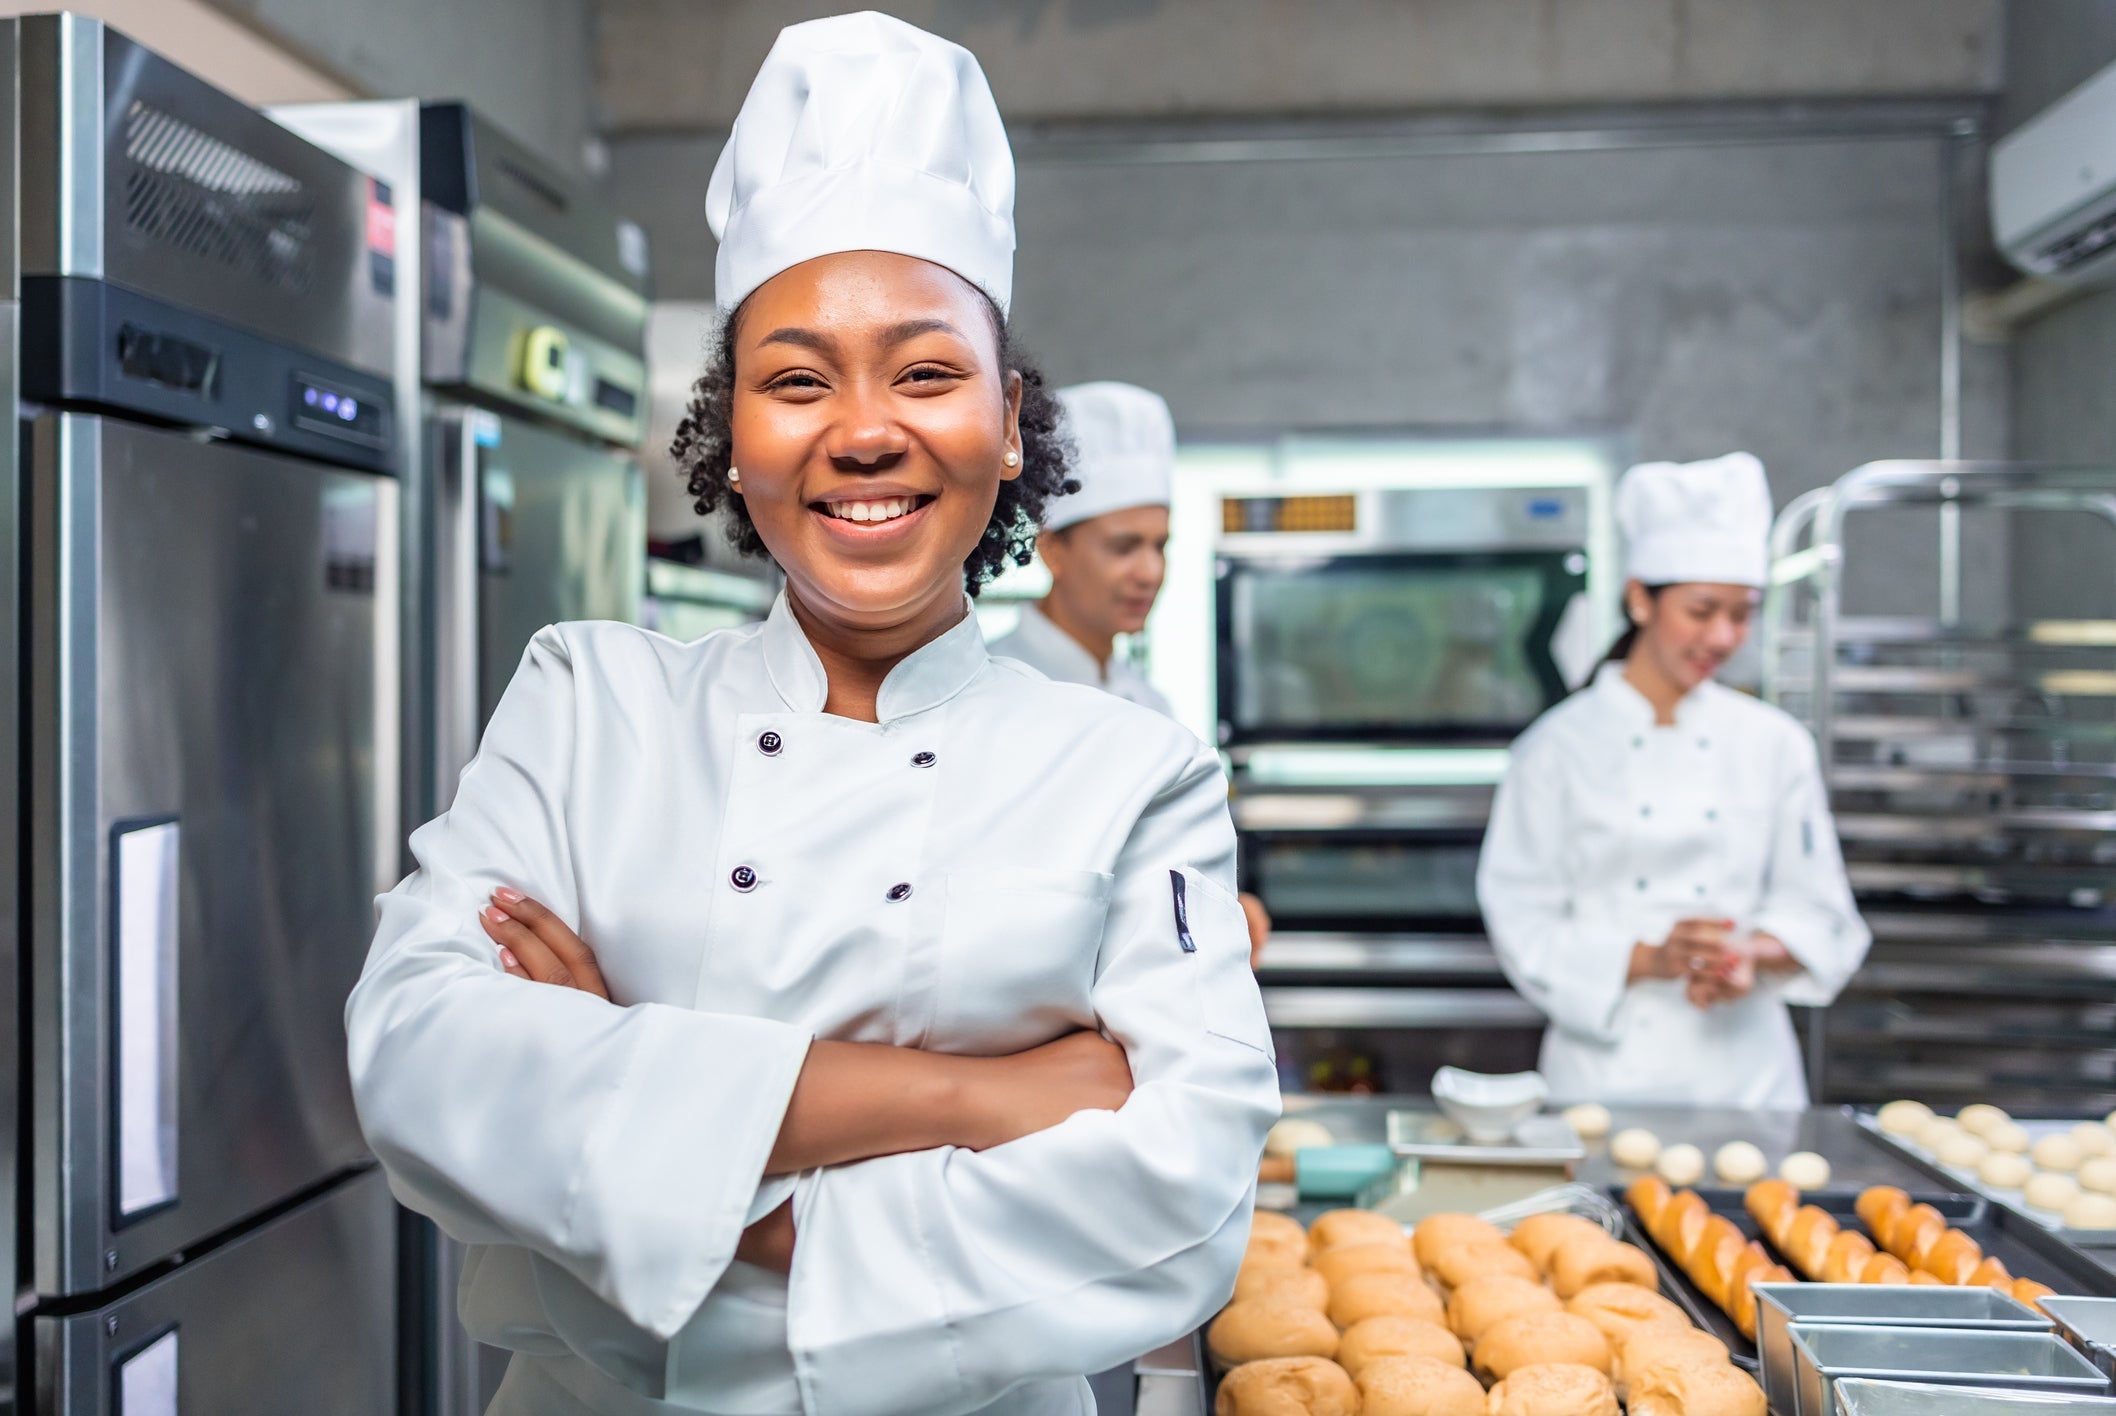 A Guide to Hygiene Safety for Restaurant Workers-eSafety Supplies, Inc